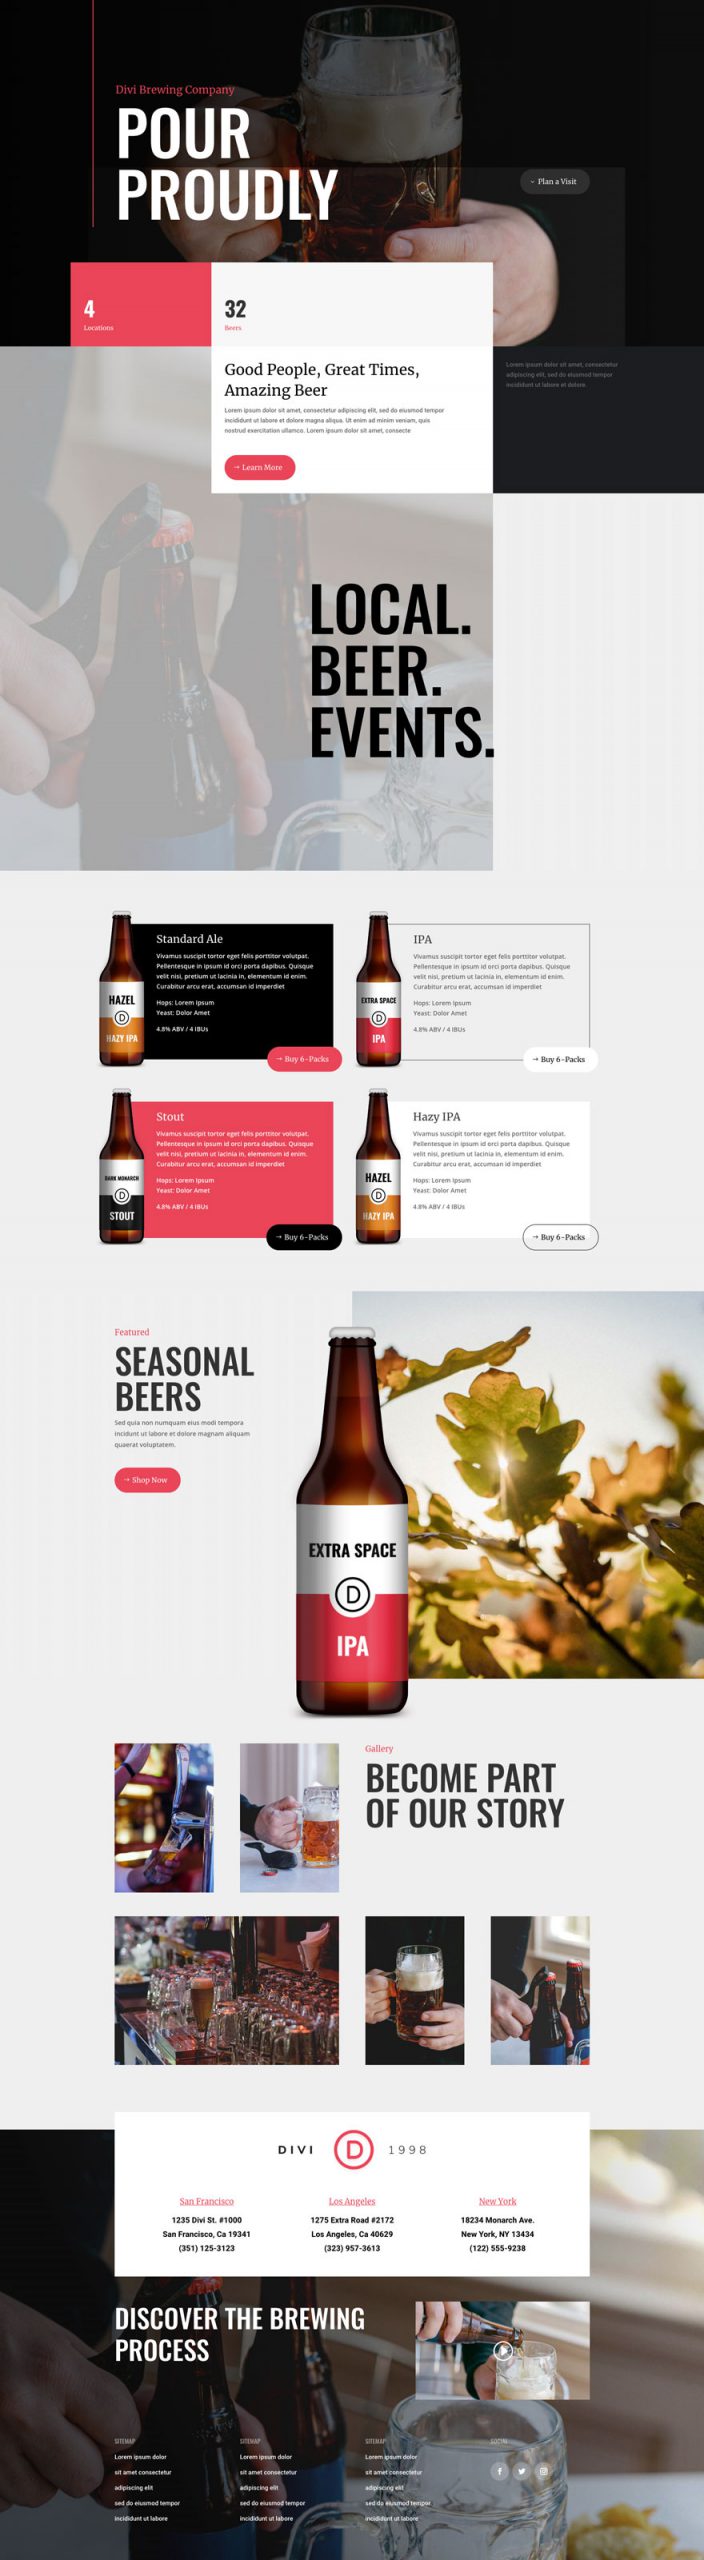 Brouwerij Home Page